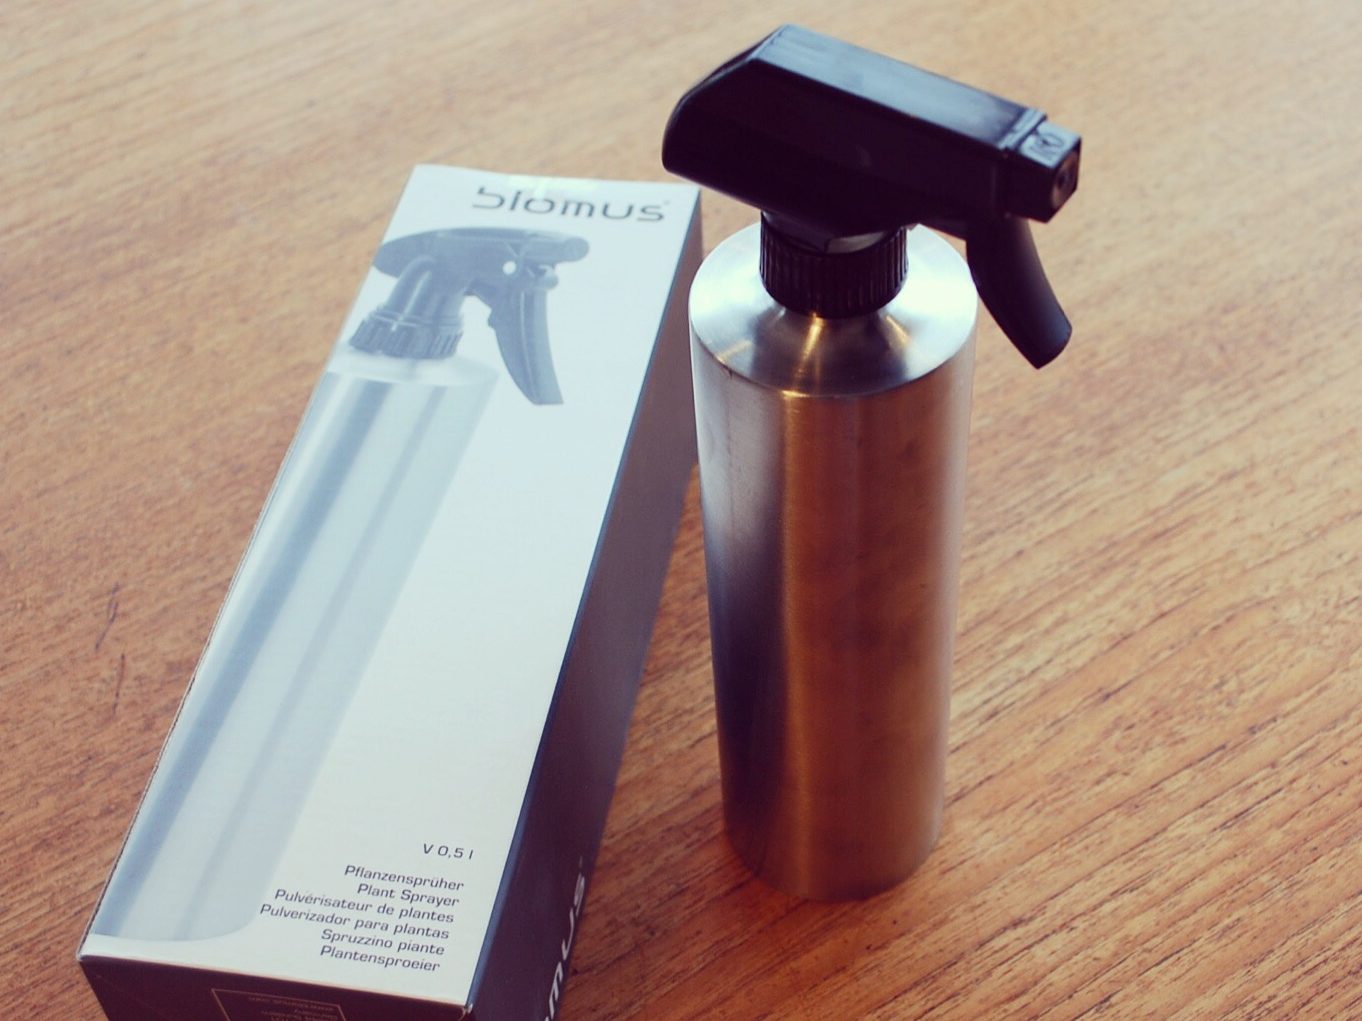 STAINLESS STEEL SPRAY